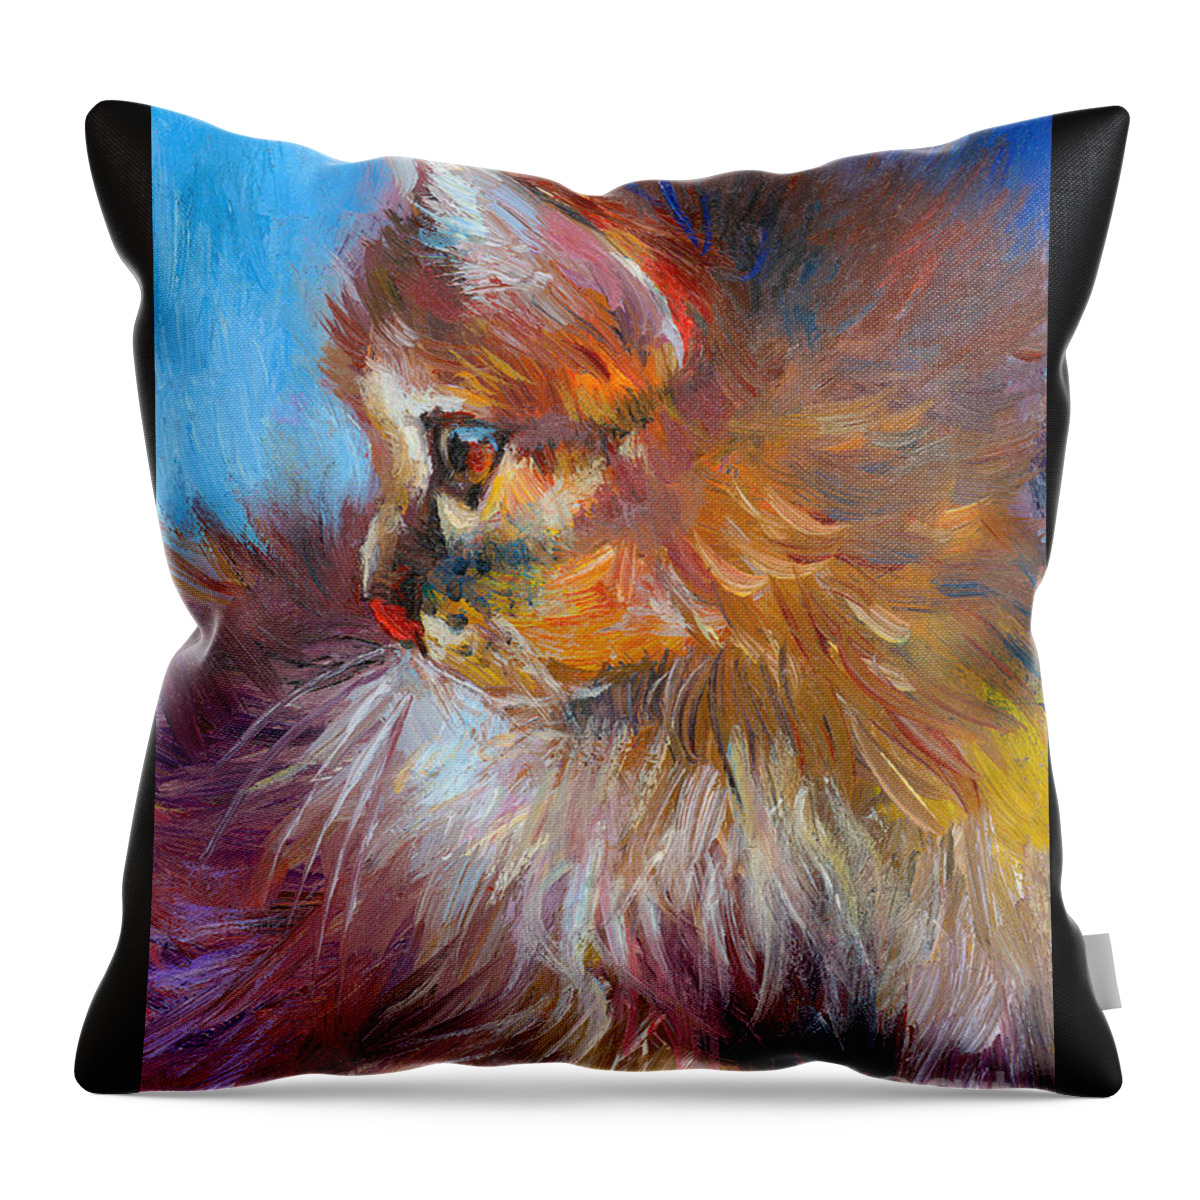 Tubby Cat Painting Throw Pillow featuring the painting Curious Tubby Kitten painting by Svetlana Novikova